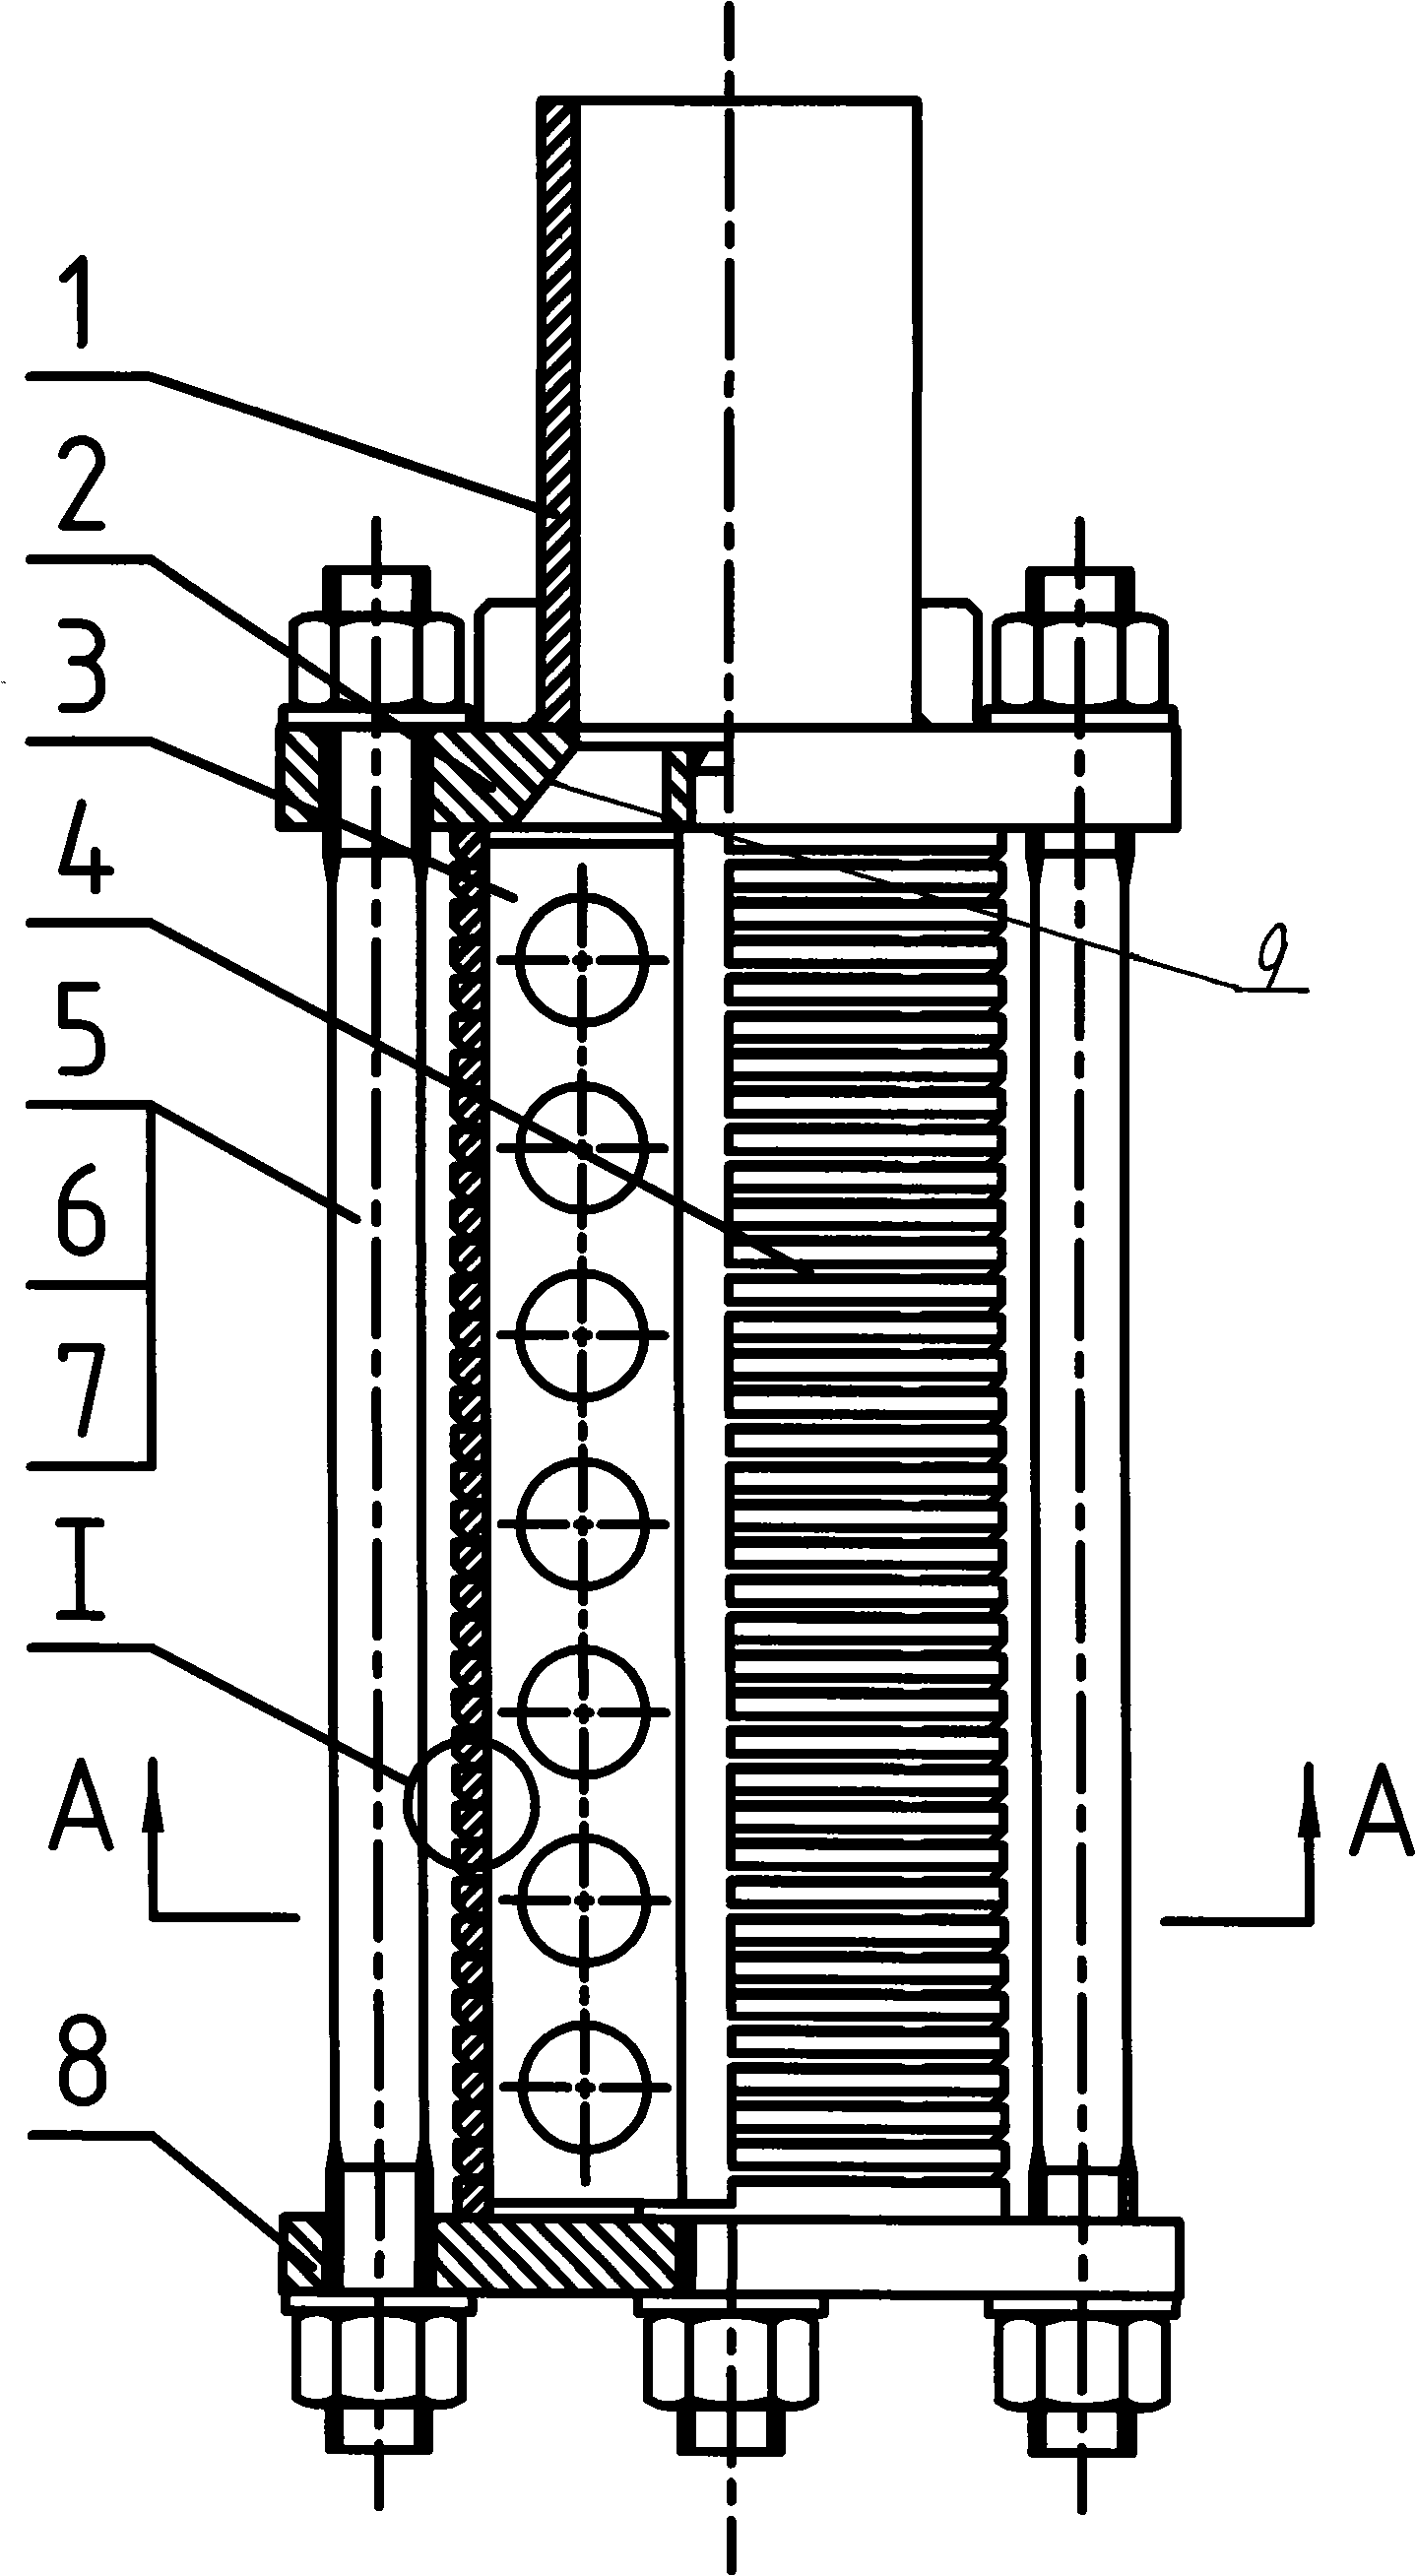 Filter head apparatus of nuclear plant desalting device